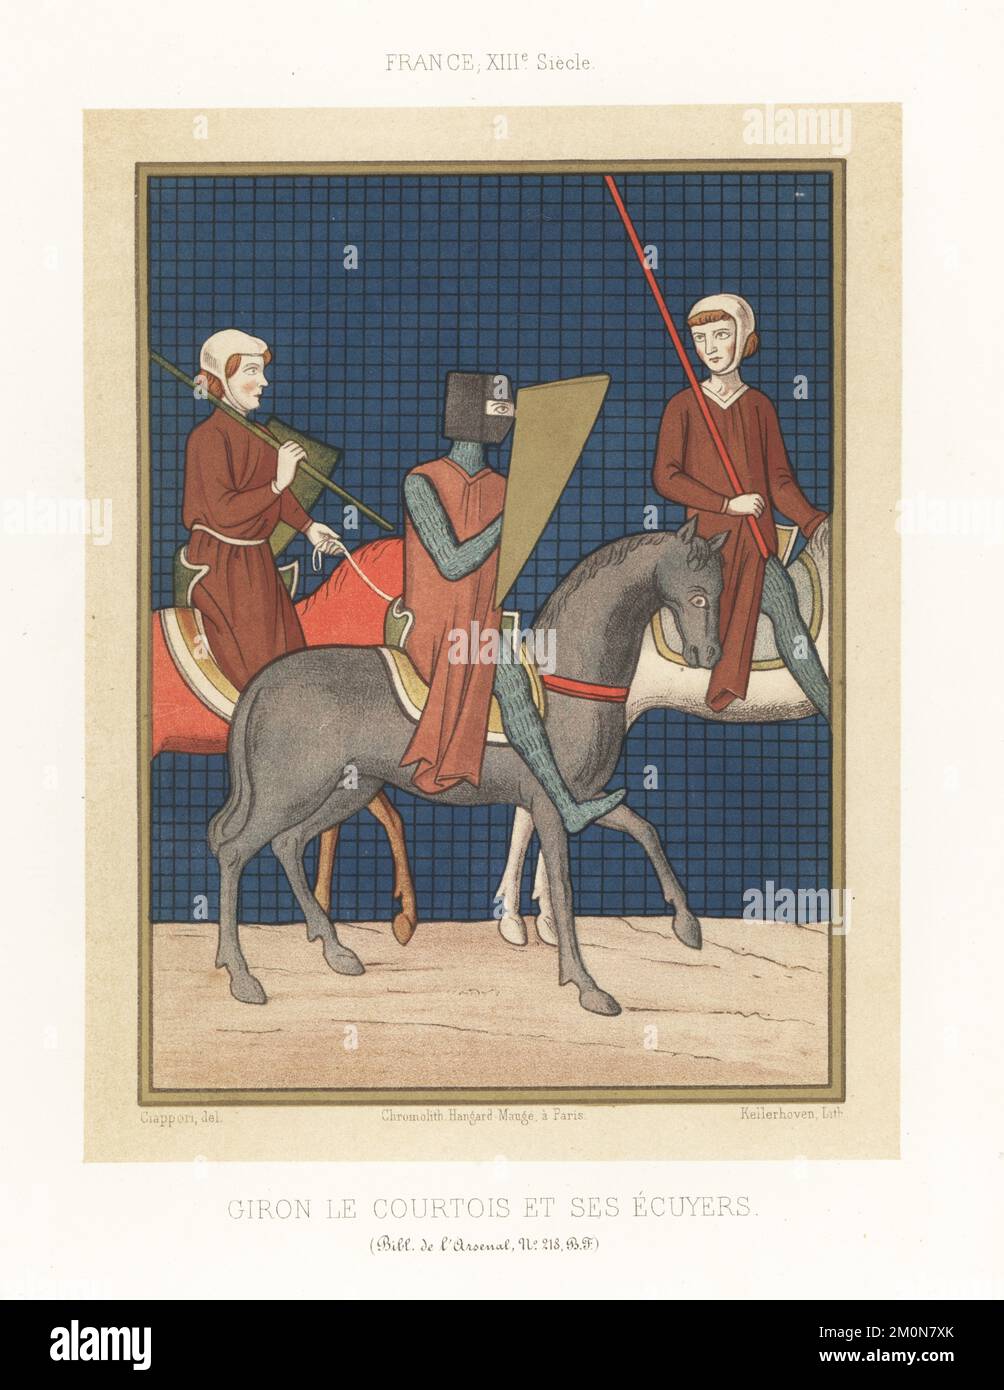 Guiron le Courtois and his equerries, 13th century. Knight in cylindrical helmet, chainmail armour hauberk, with gold buckler. Fictional knight of Arthurian legend and the French romance Palamedes. From MS 218, Bibliotheque de l'Arsenal. Giron le Courtois et ses ecuyers. France XIIIe Siecle. Chromolithograph by Franz Kellerhoven after an illustration by Claudius Joseph Ciappori  from Charles Louandre’s Les Arts Somptuaires, The Sumptuary Arts, Hangard-Mauge, Paris, 1858. Stock Photo